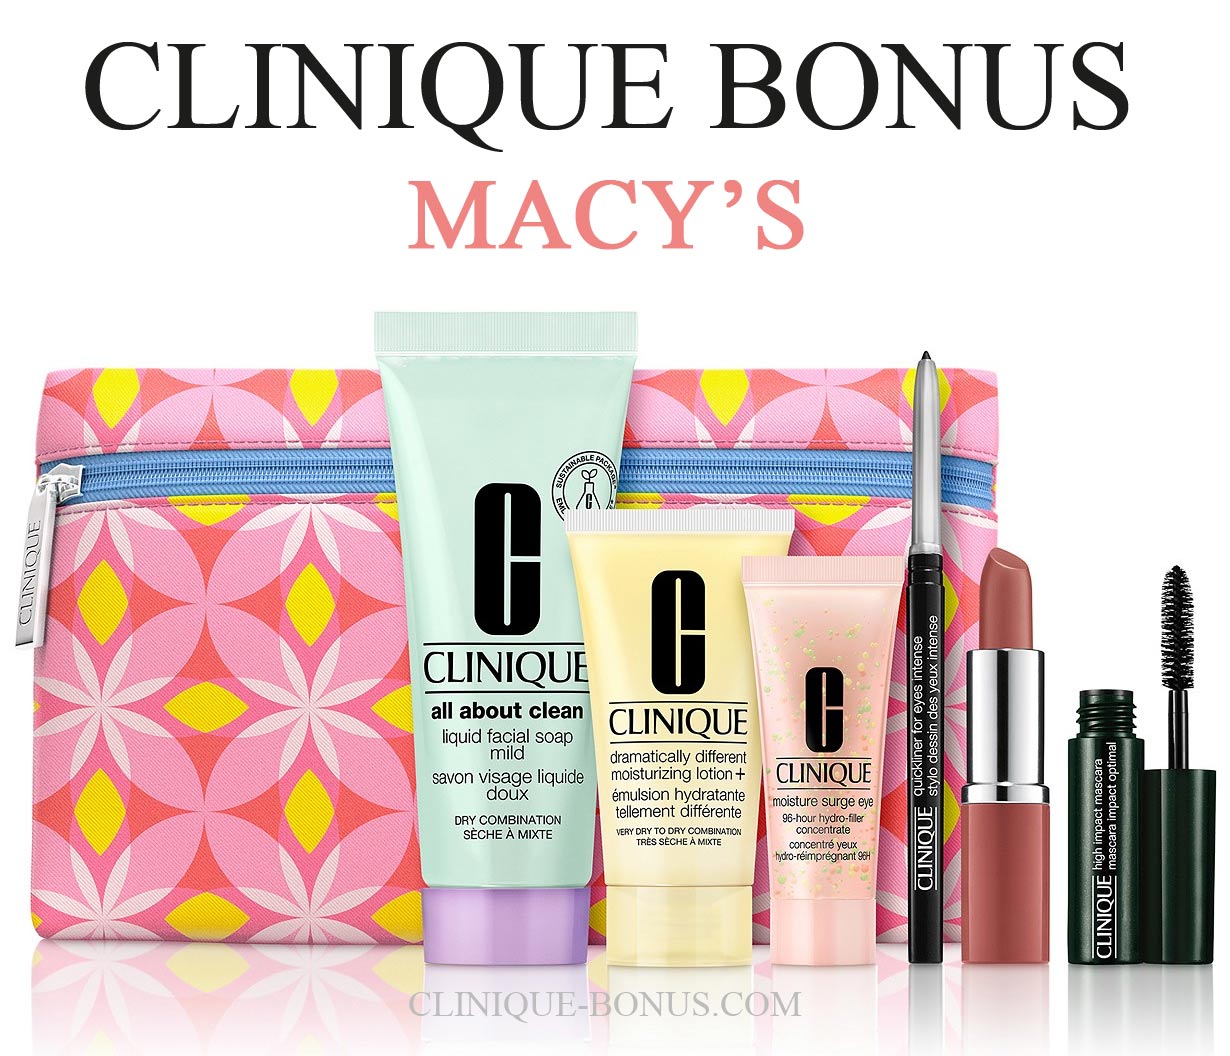 Digital Ambientalista Probar Clinique Gifts at Macy's - 2023